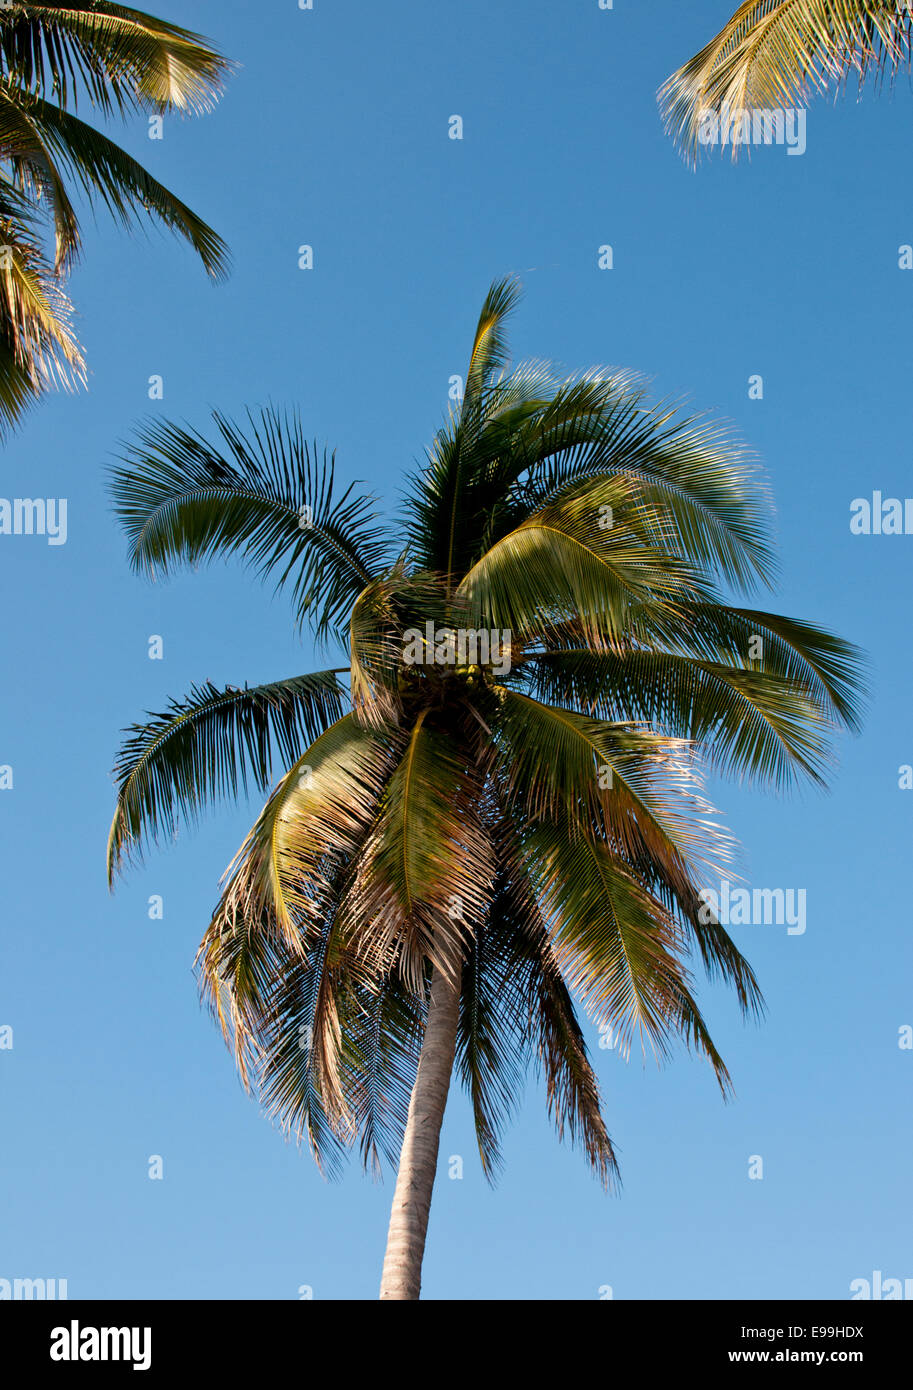 Canopy of a coconut palm against a blue sky taken at Playa Mezcala on the Mexican Pacific coast Stock Photo